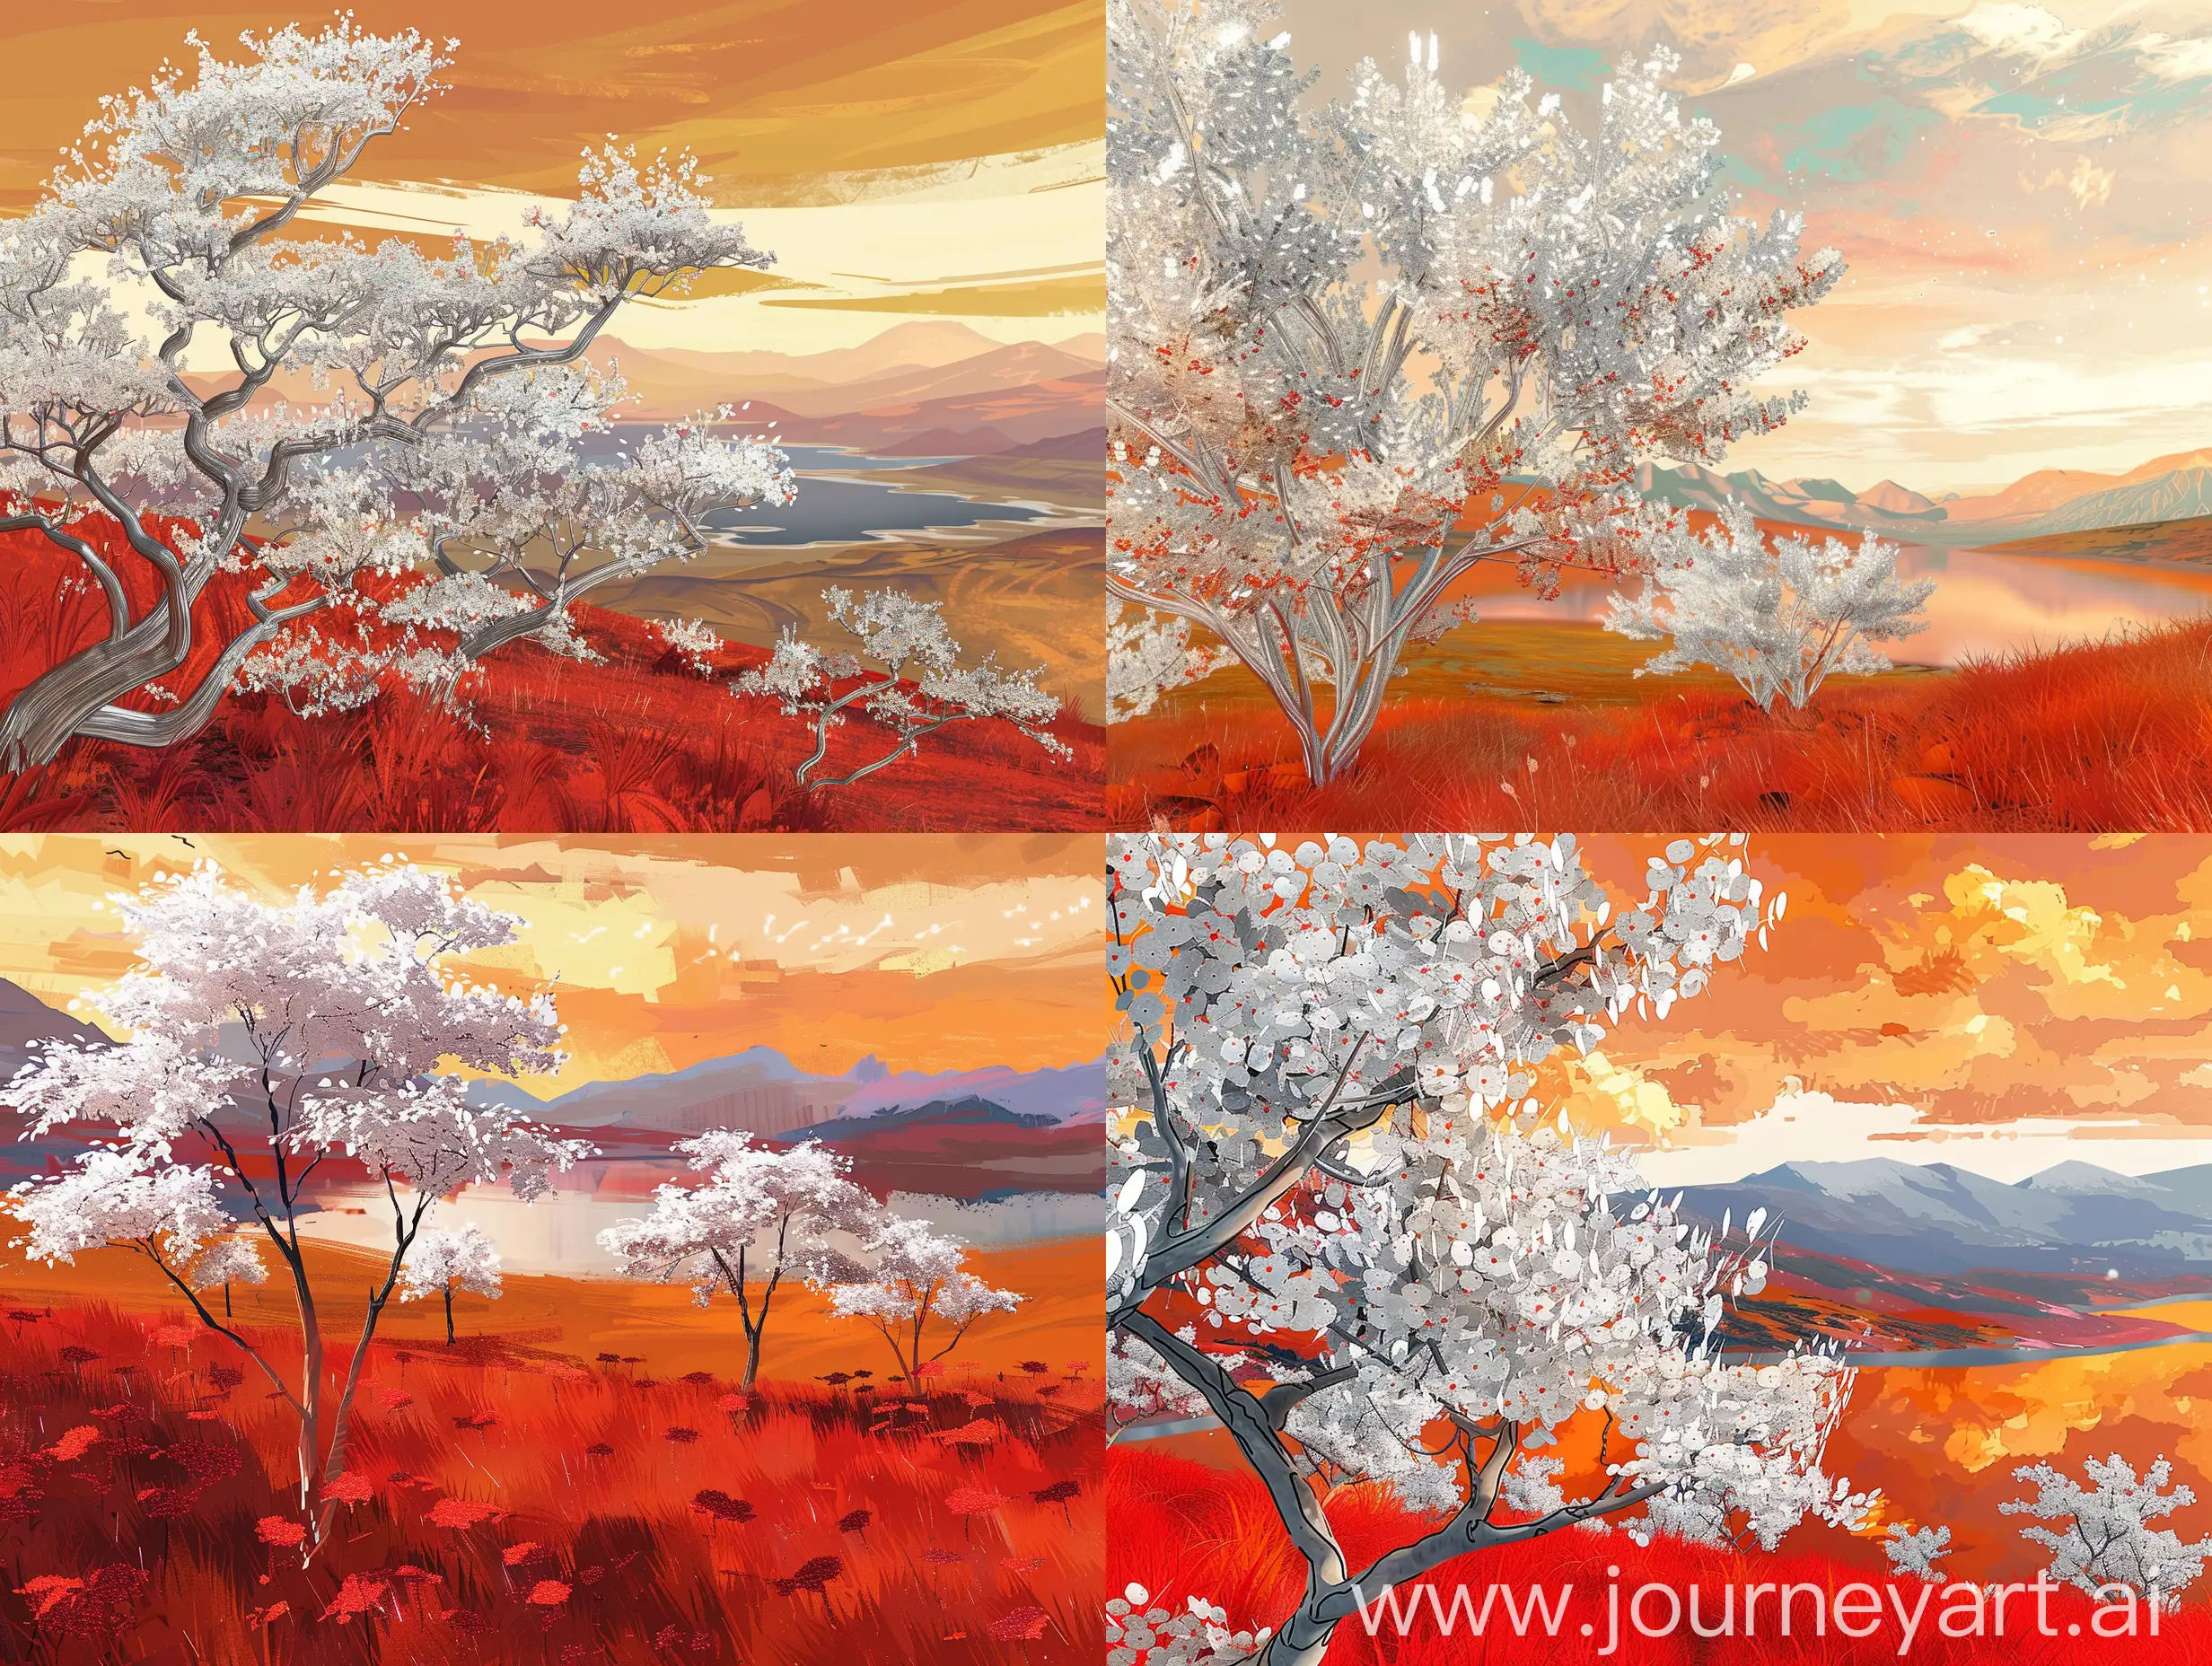 concept art of a landscape, silver cherry-blossom type trees, red grass, orange sky and lake, distant mountains